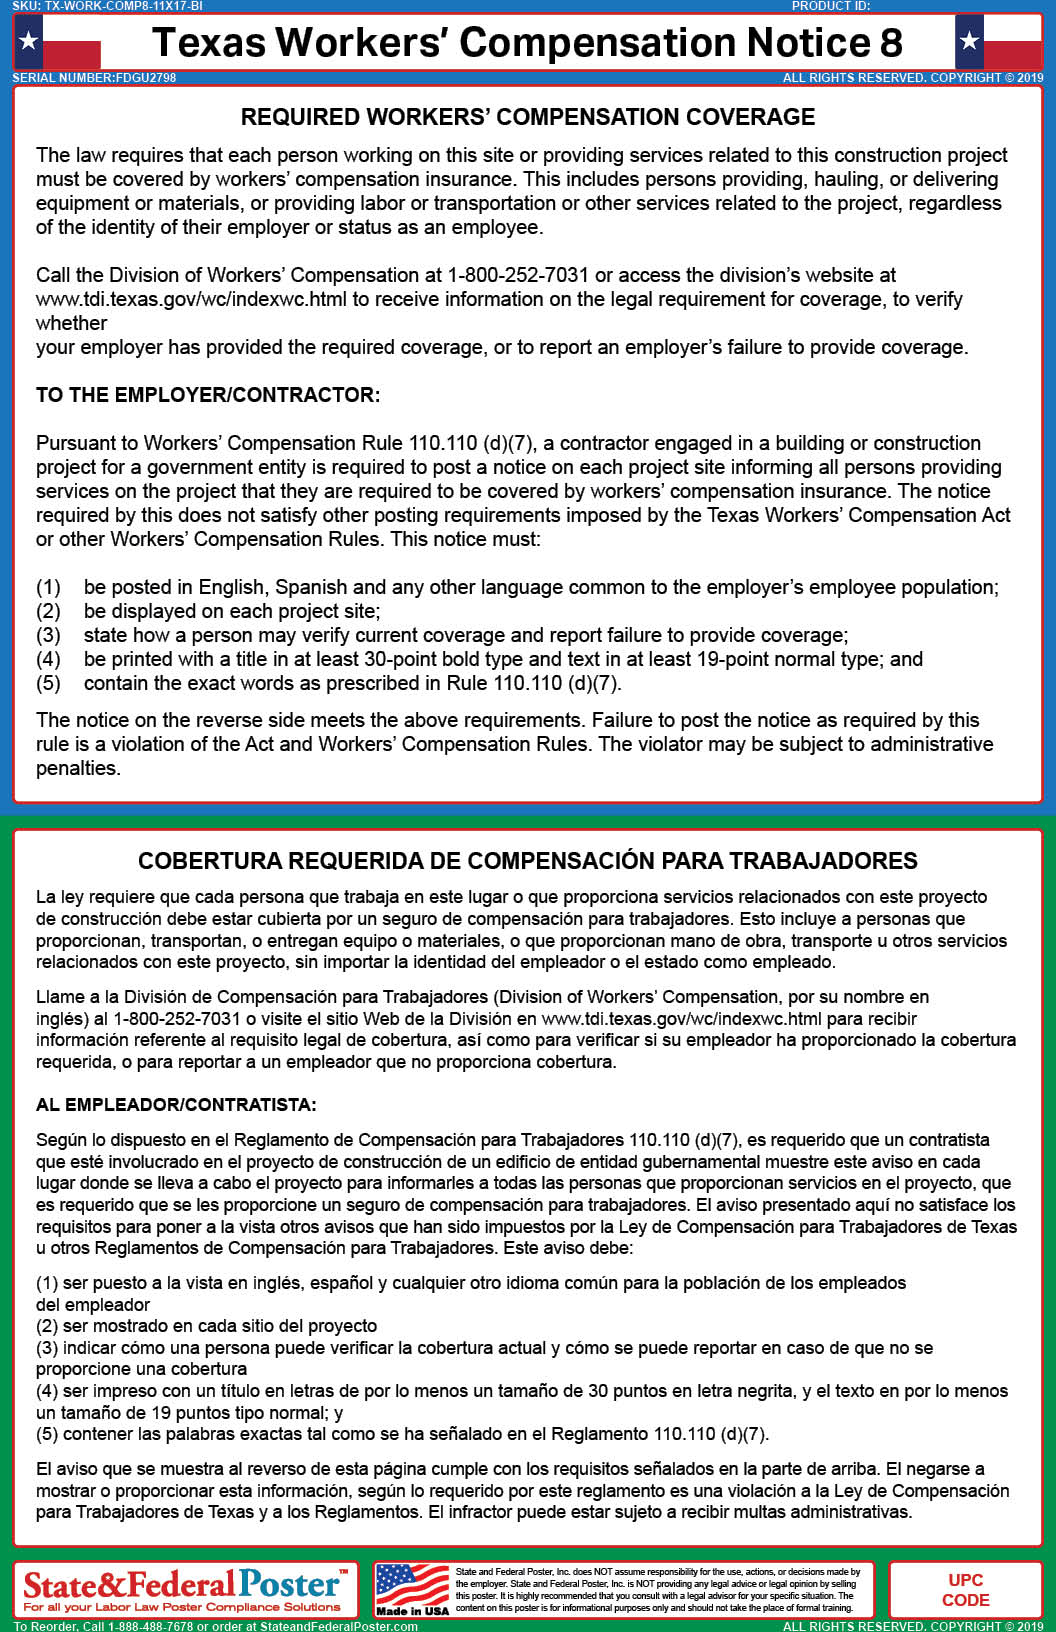 Texas Workers' Compensation Notice 8 (Bilingual) — State and Federal Poster